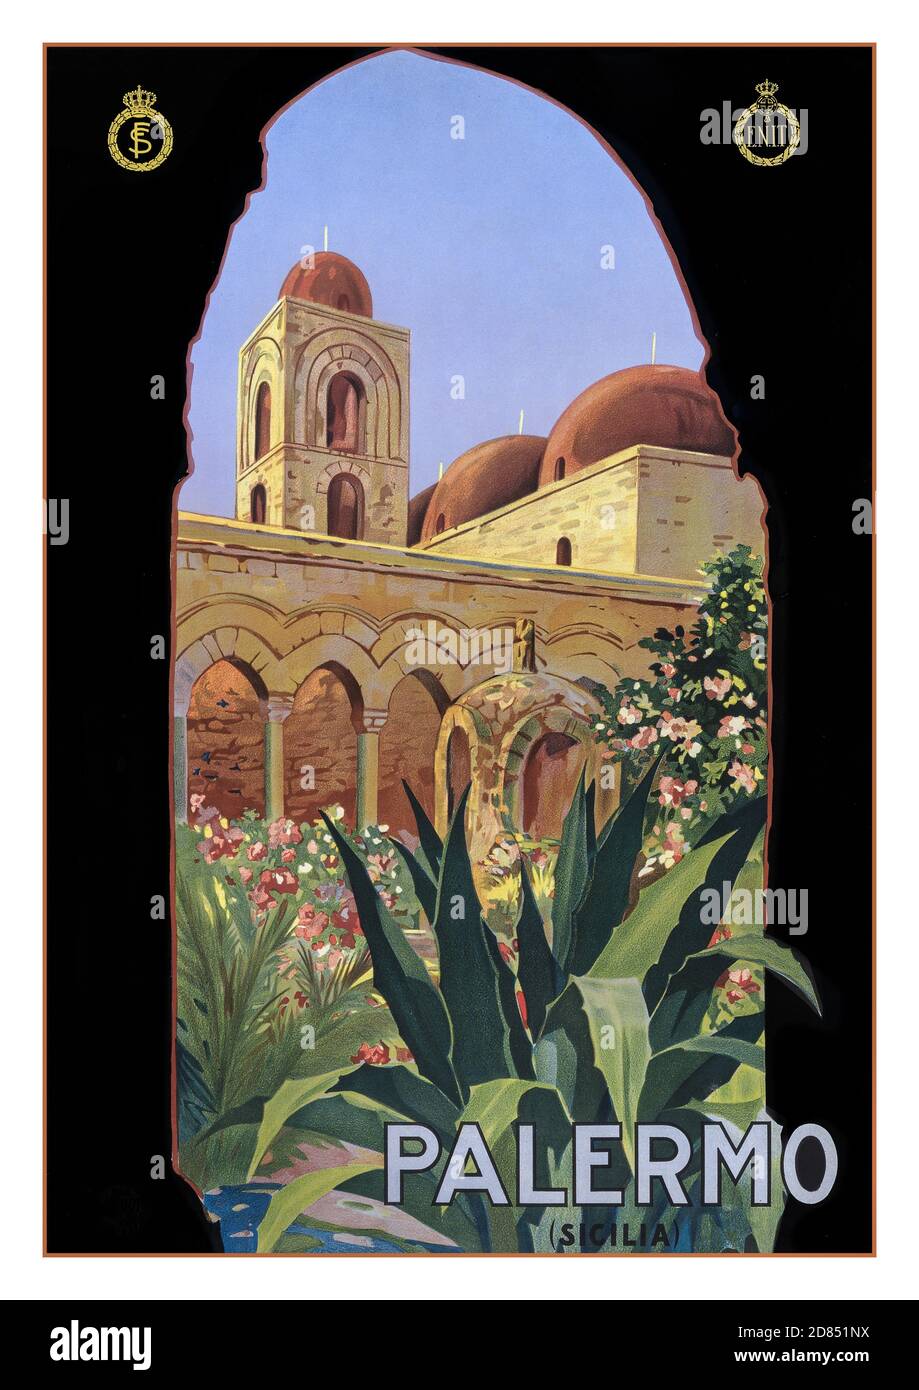 Vintage Travel Poster 1920’s Palermo (Sicilia) Italy Artwork by A. Marzi, [ca. 1920] (poster) : lithograph, color ; ENIT Travel typical lush Sicily garden courtyard with archway and tower behind, in sunny blue sky conditions Stock Photo